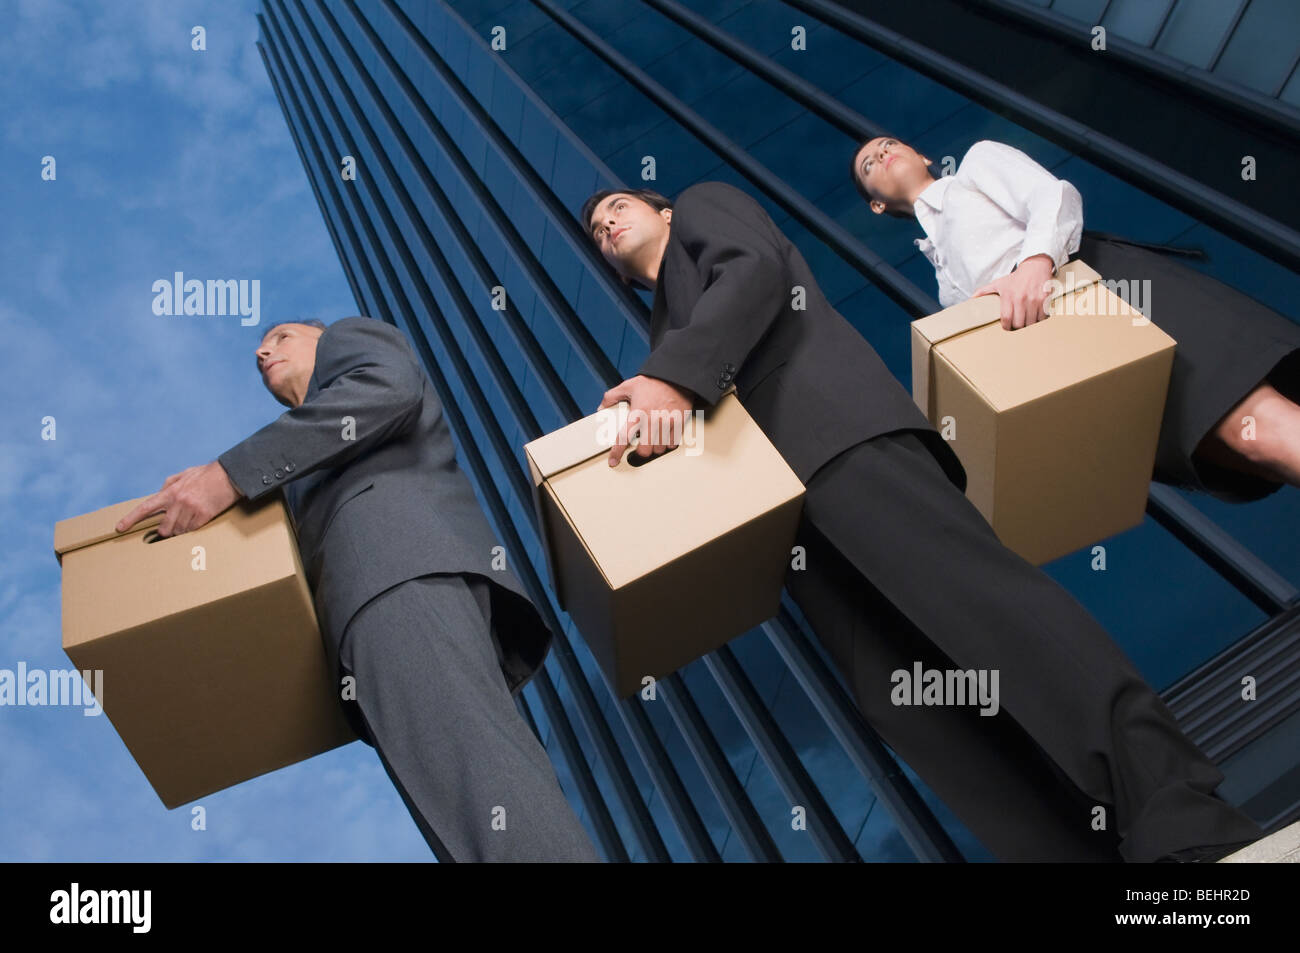 Low angle view of business executives carrying boxes Stock Photo